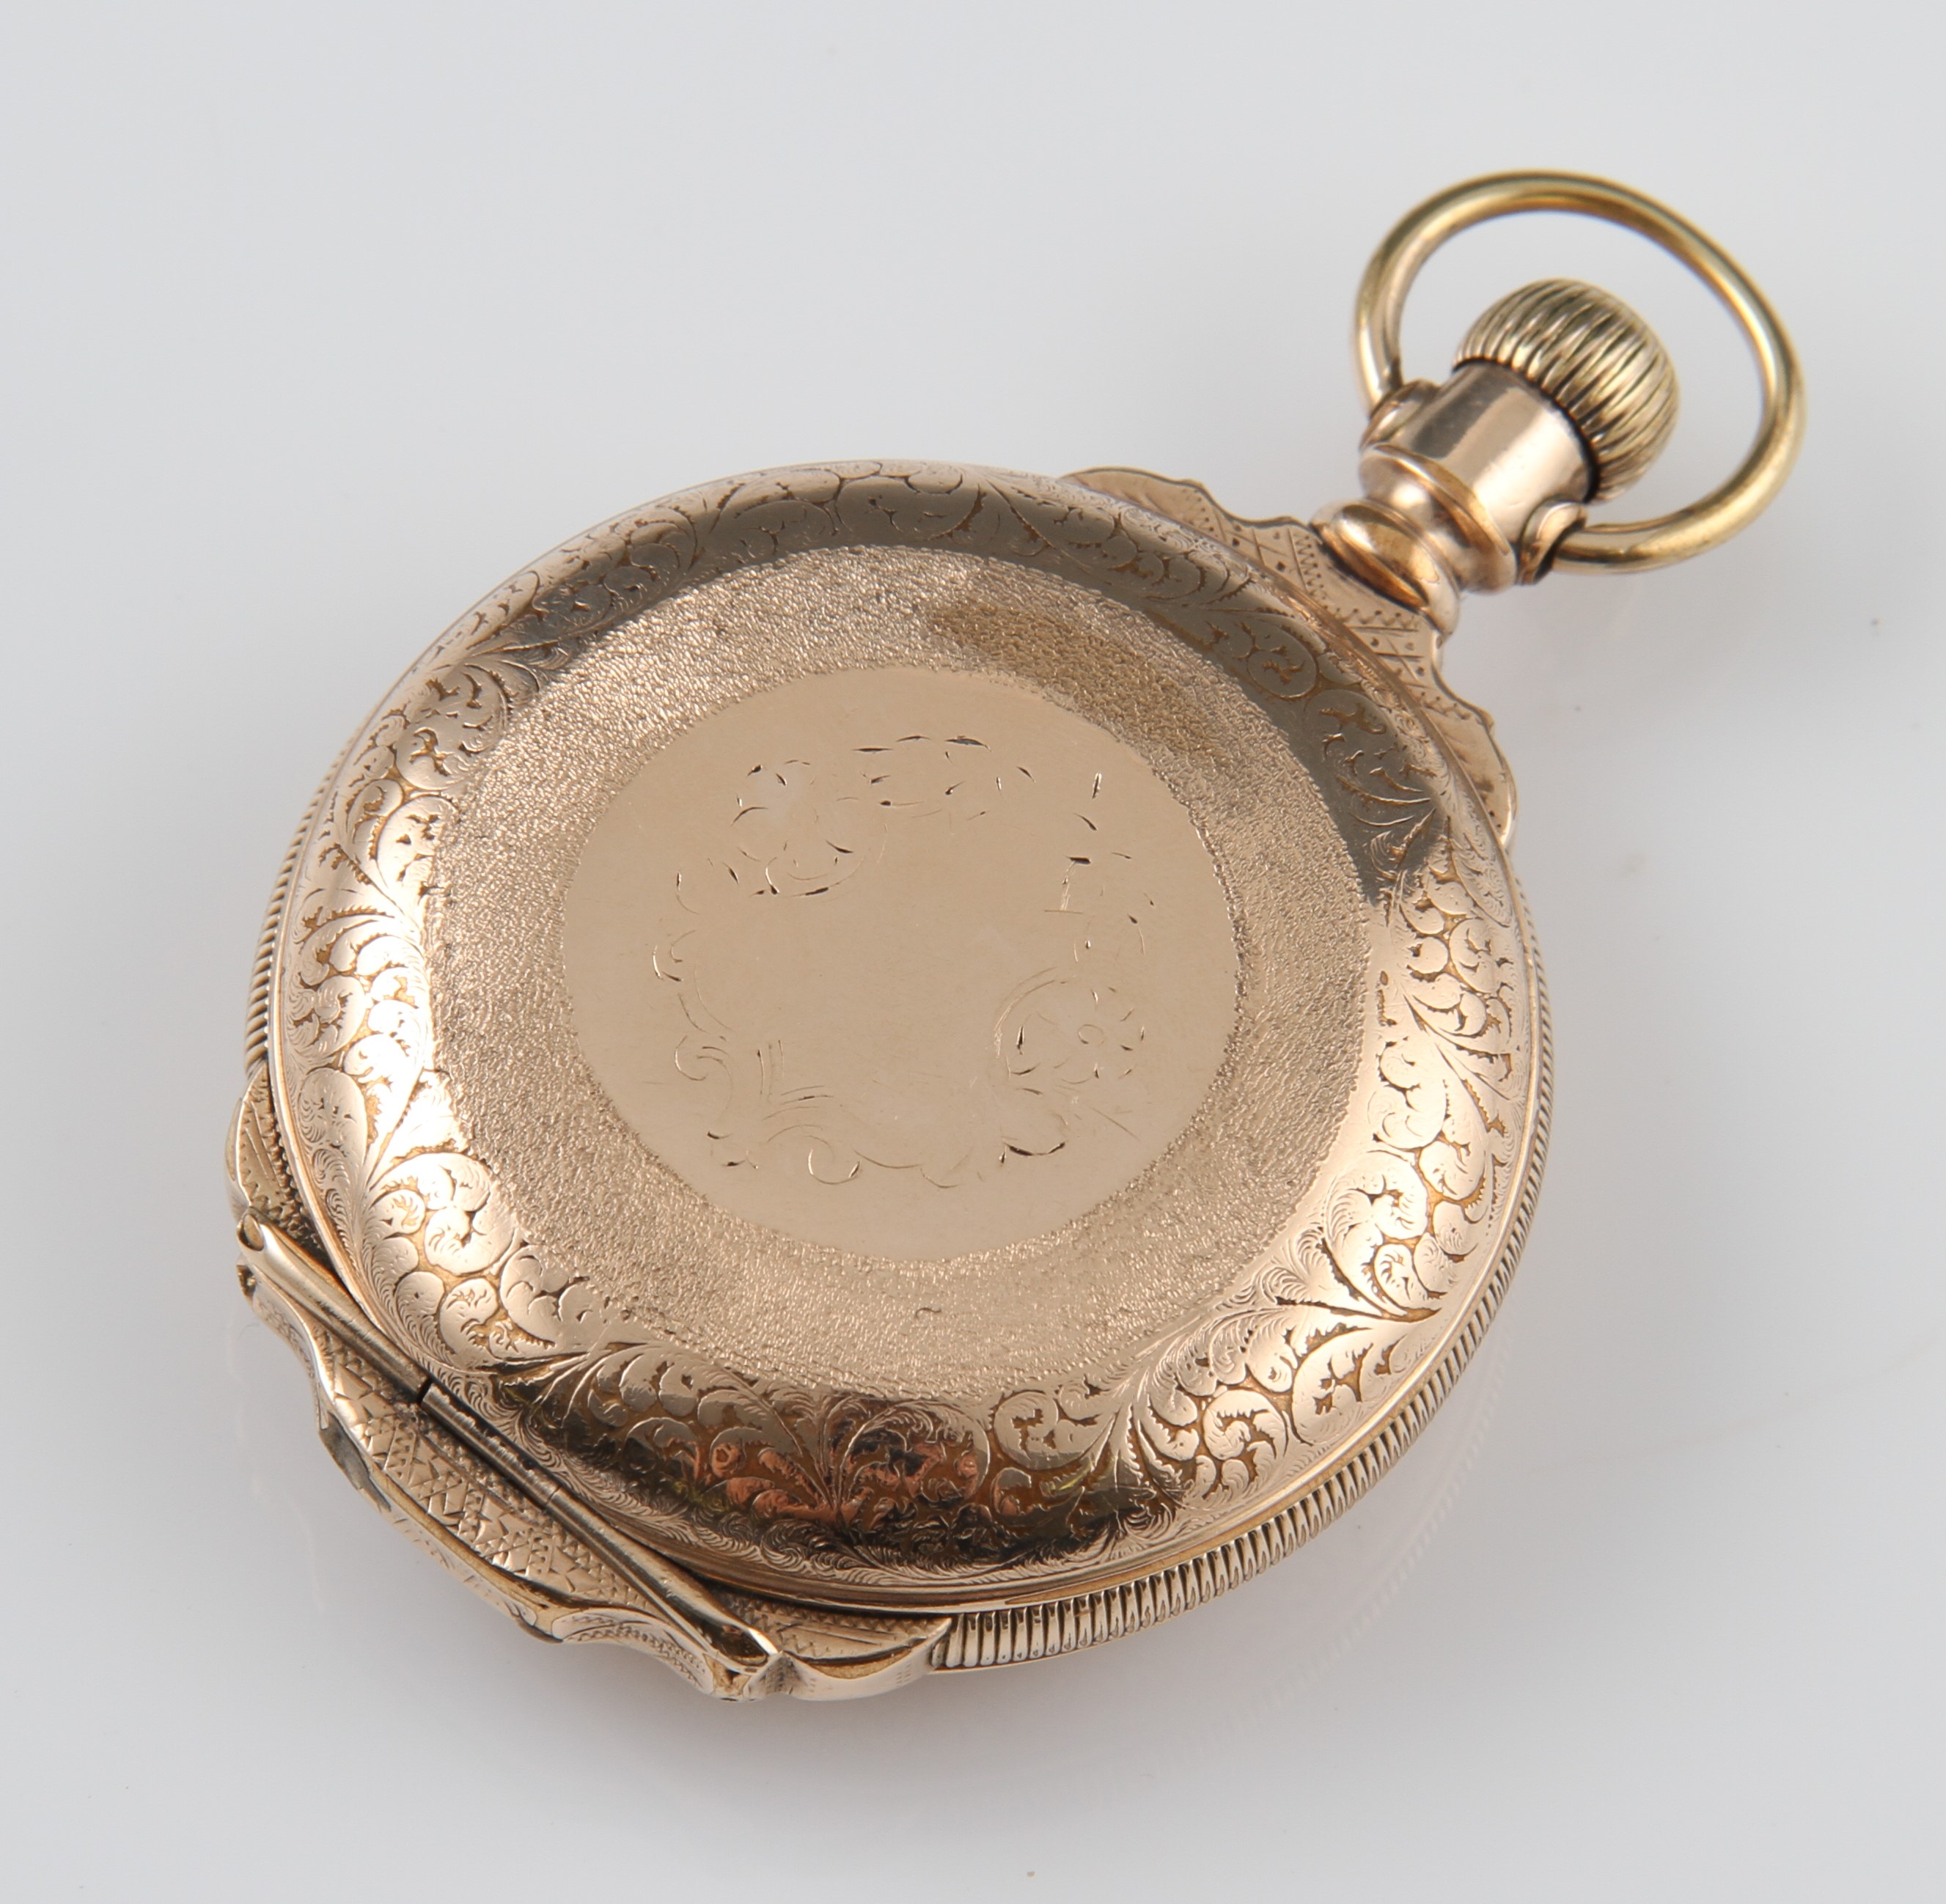 A plated P. S. Bartlett Waltham Watch Co. full hunter crown wind pocket watch, the white enamel dial - Image 2 of 3